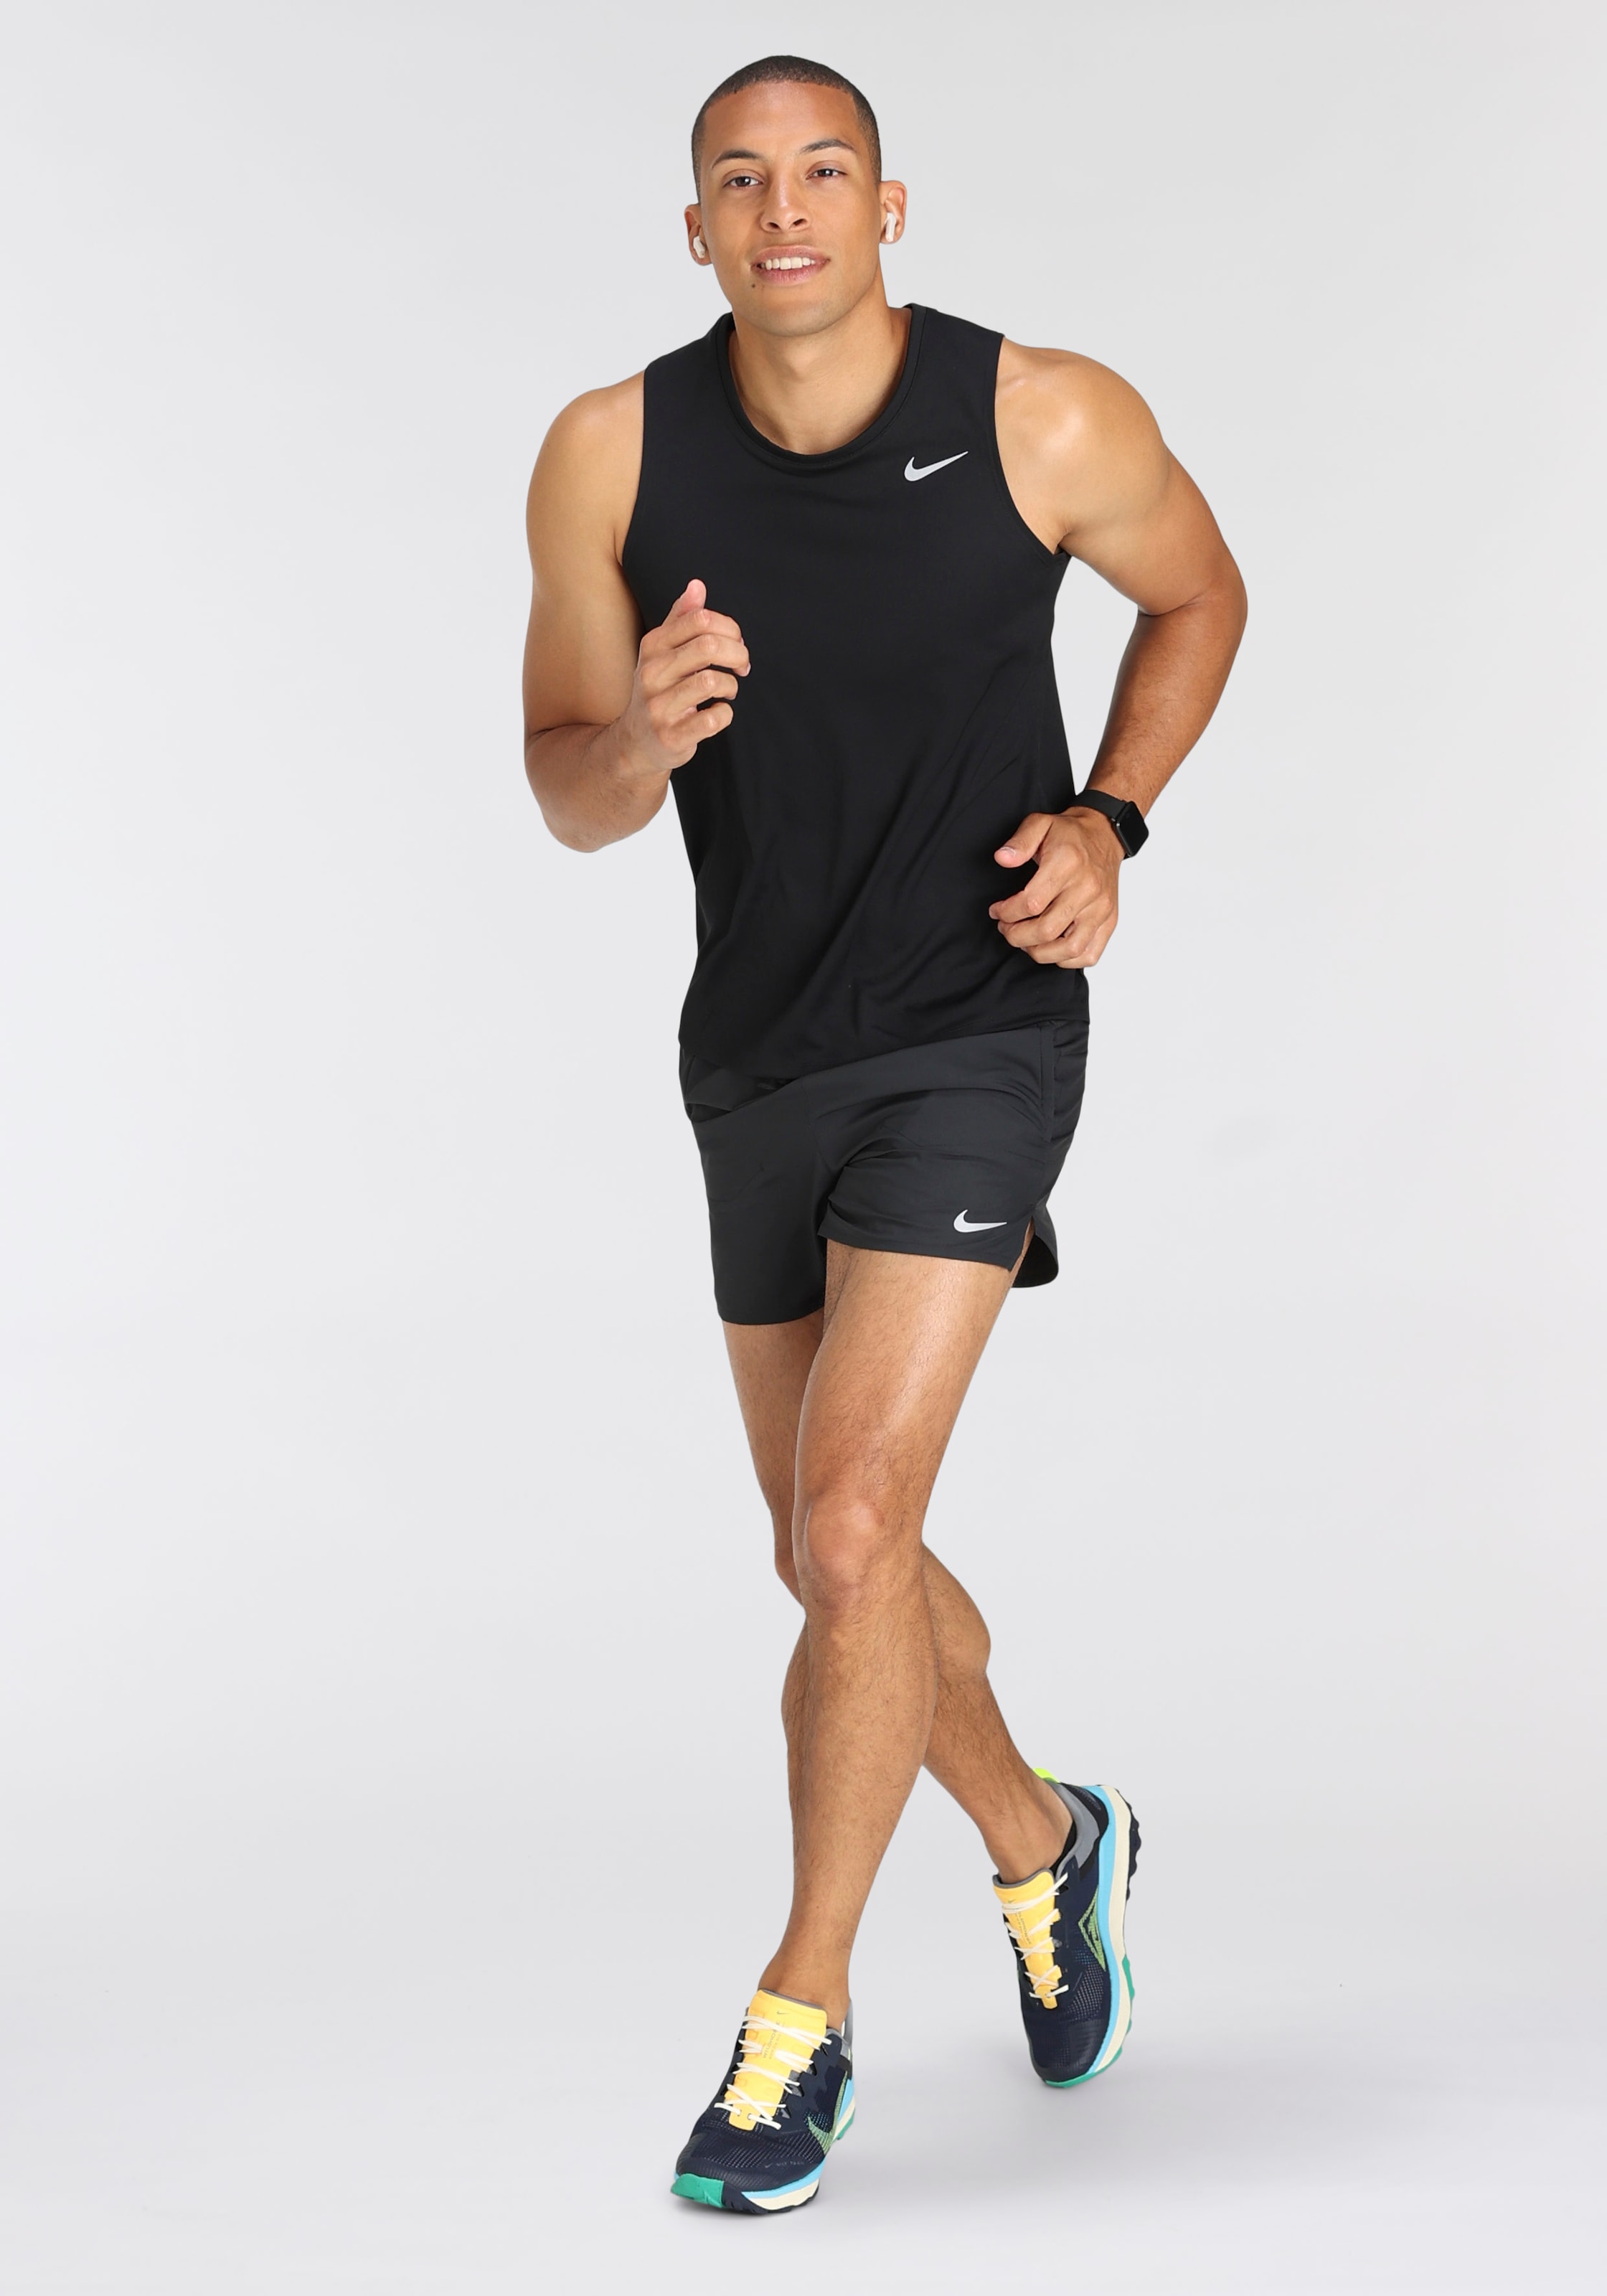 Nike Laufshorts »Dri-FIT Stride Men's " Brief-Lined Running Shorts«